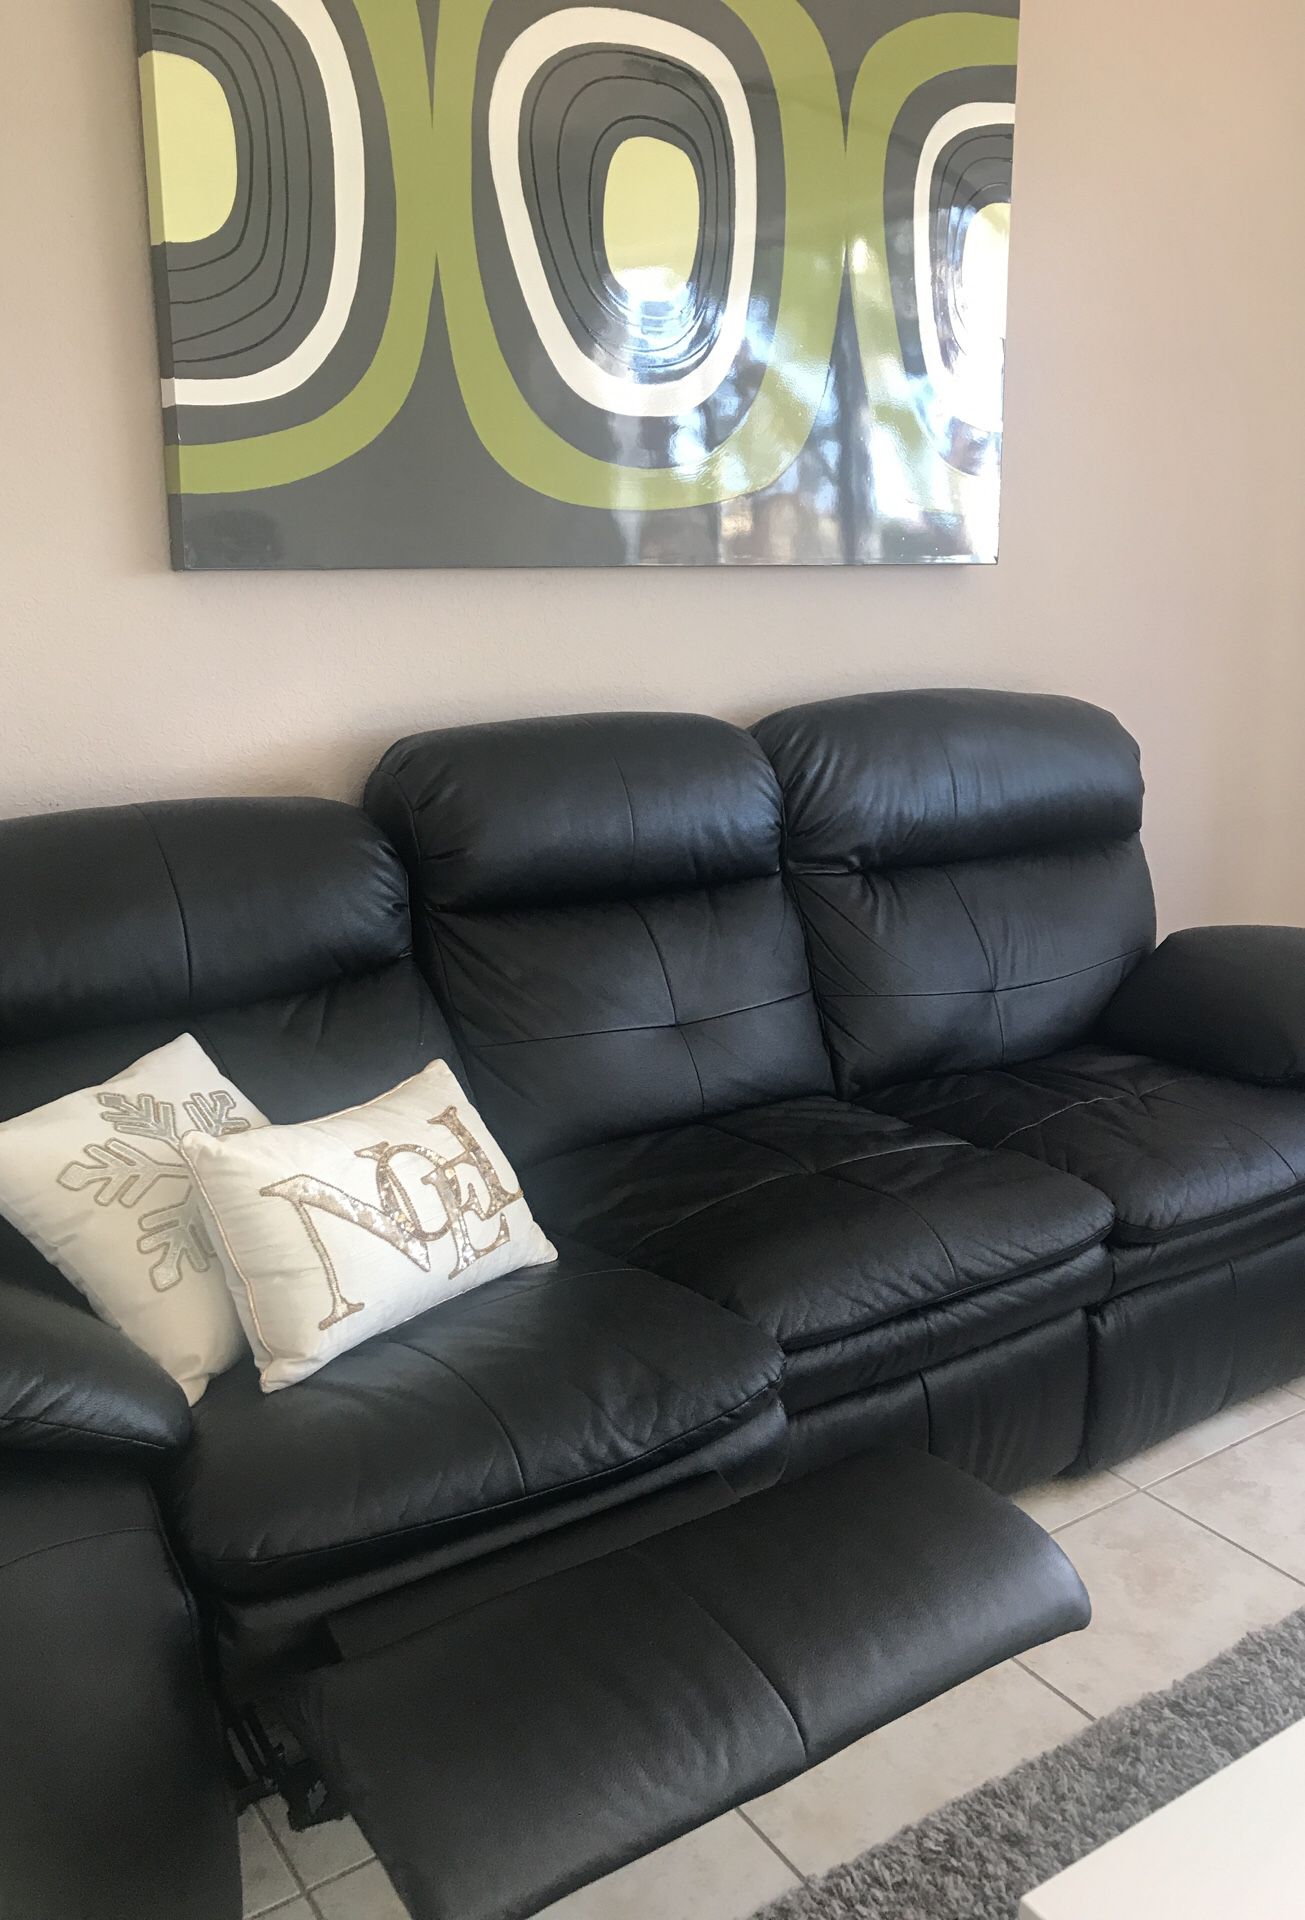 Black Leather Reclinable Sofa REDUCED $250 Excellent Conditions!!!